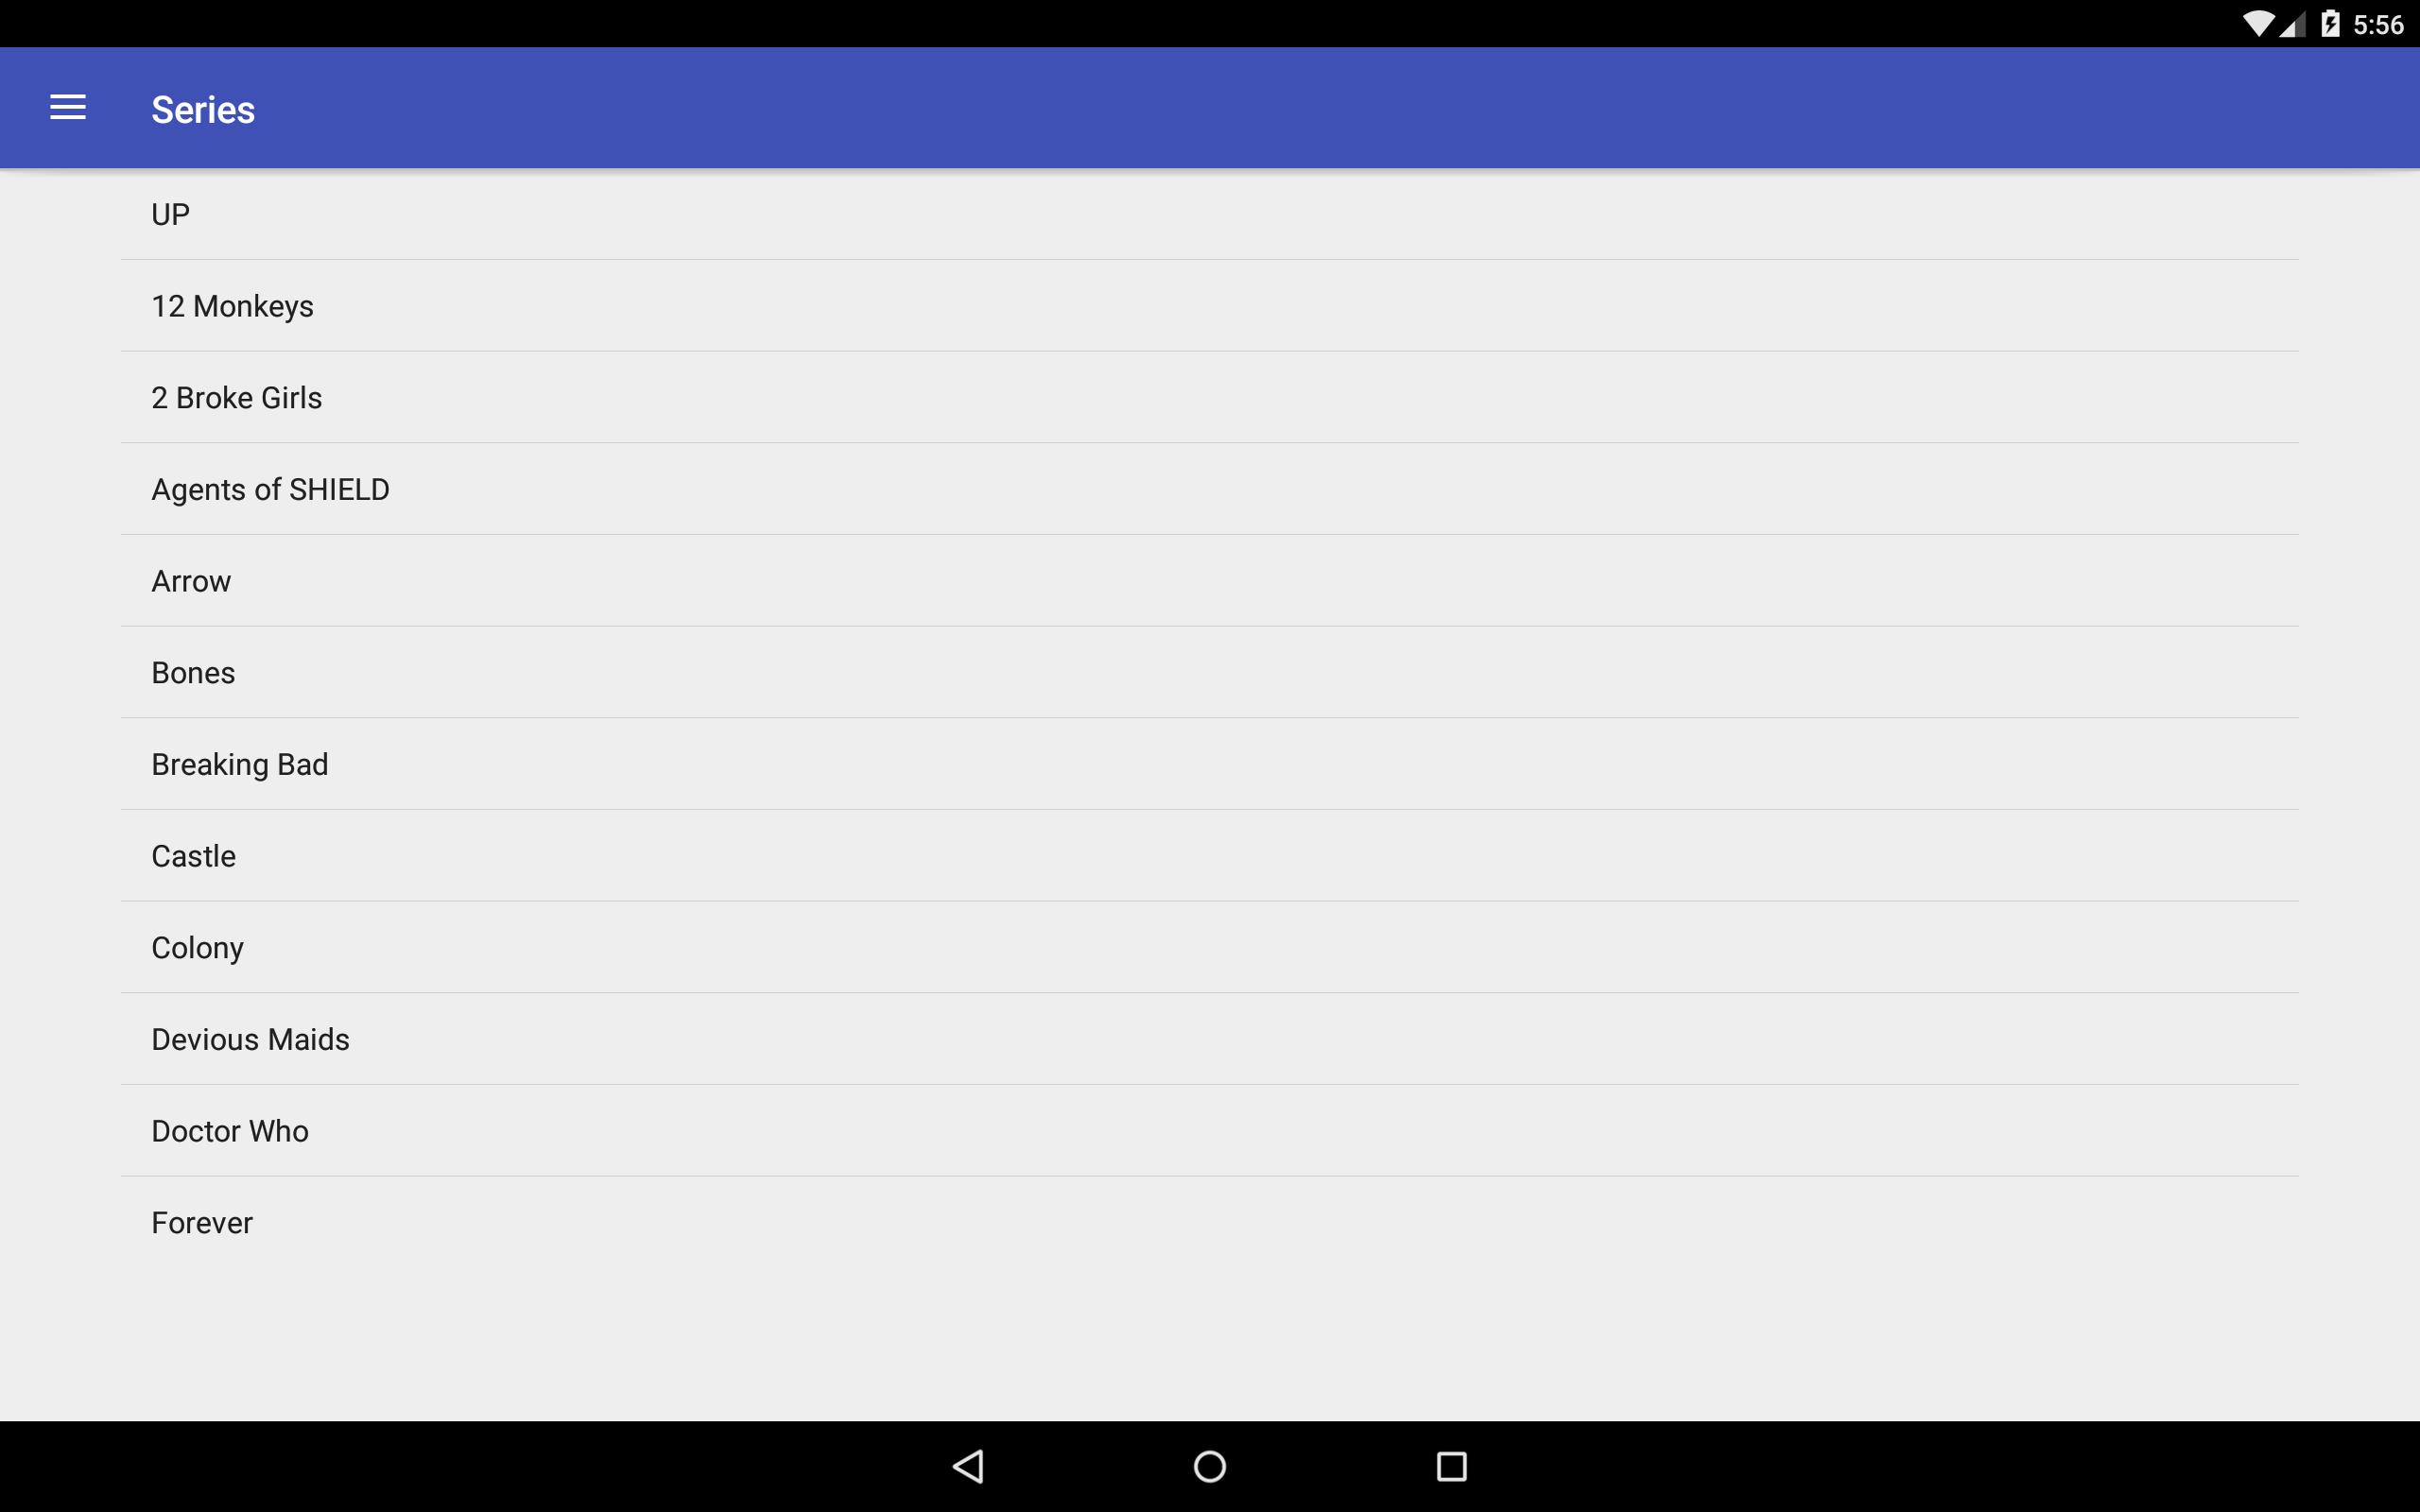 Exoro - series (free ororo.tv) for Android - APK Download